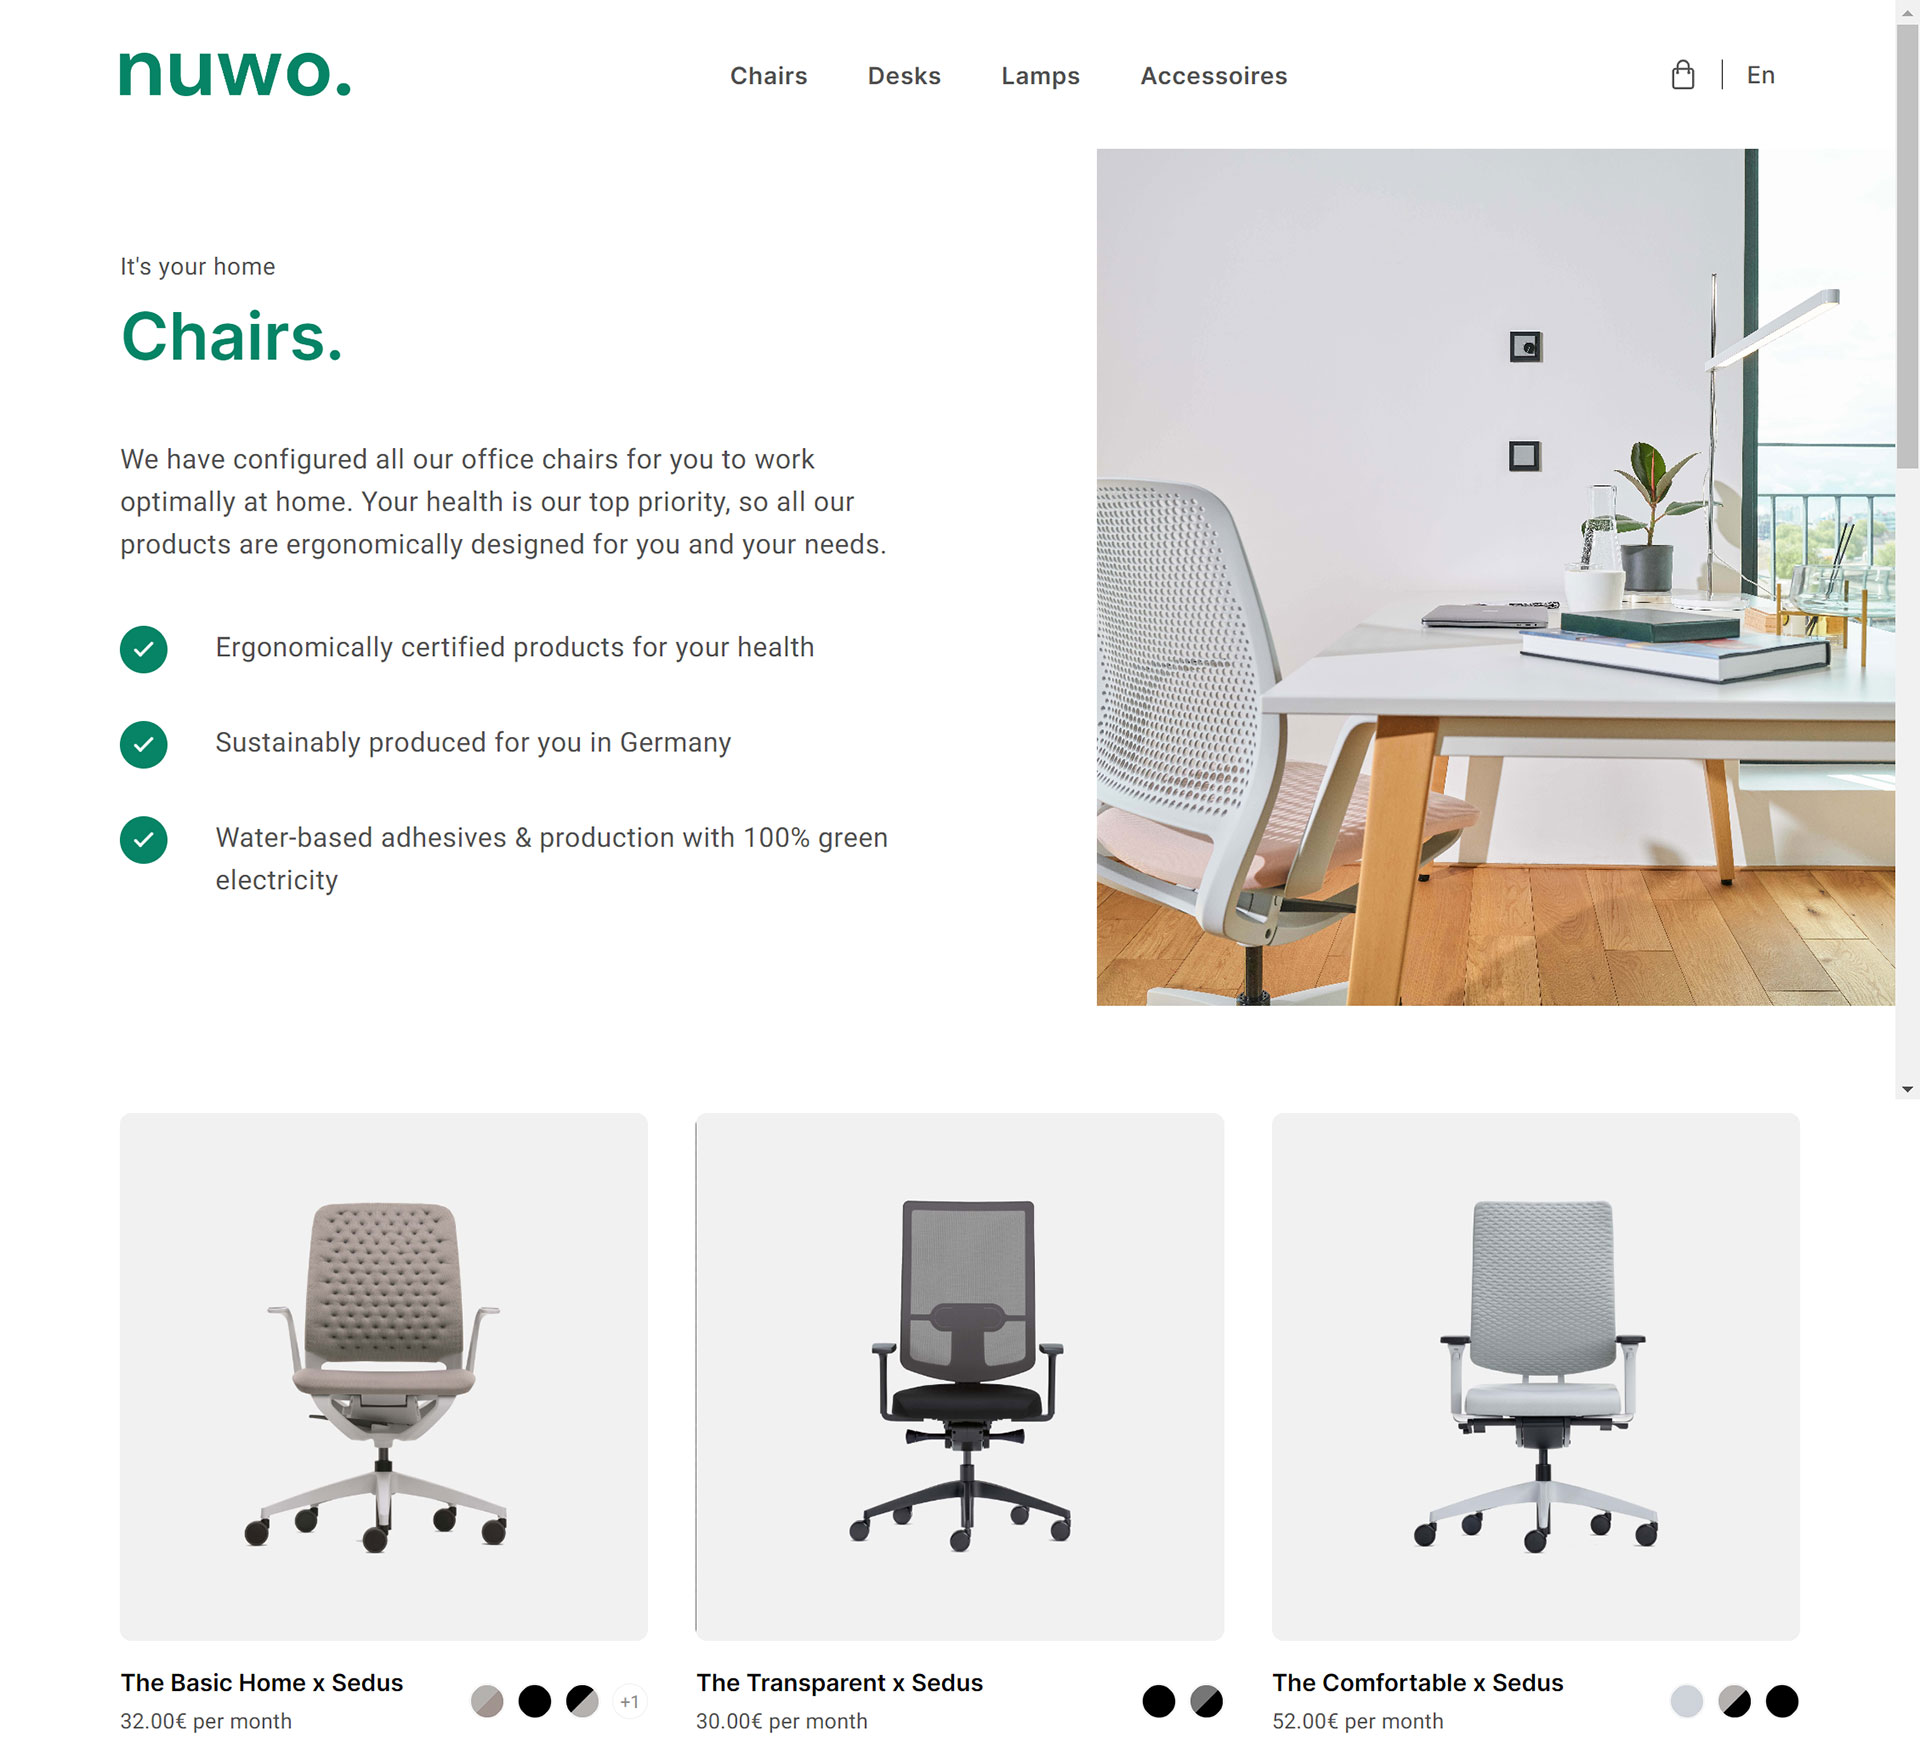 The example of nuwo store for their clients.